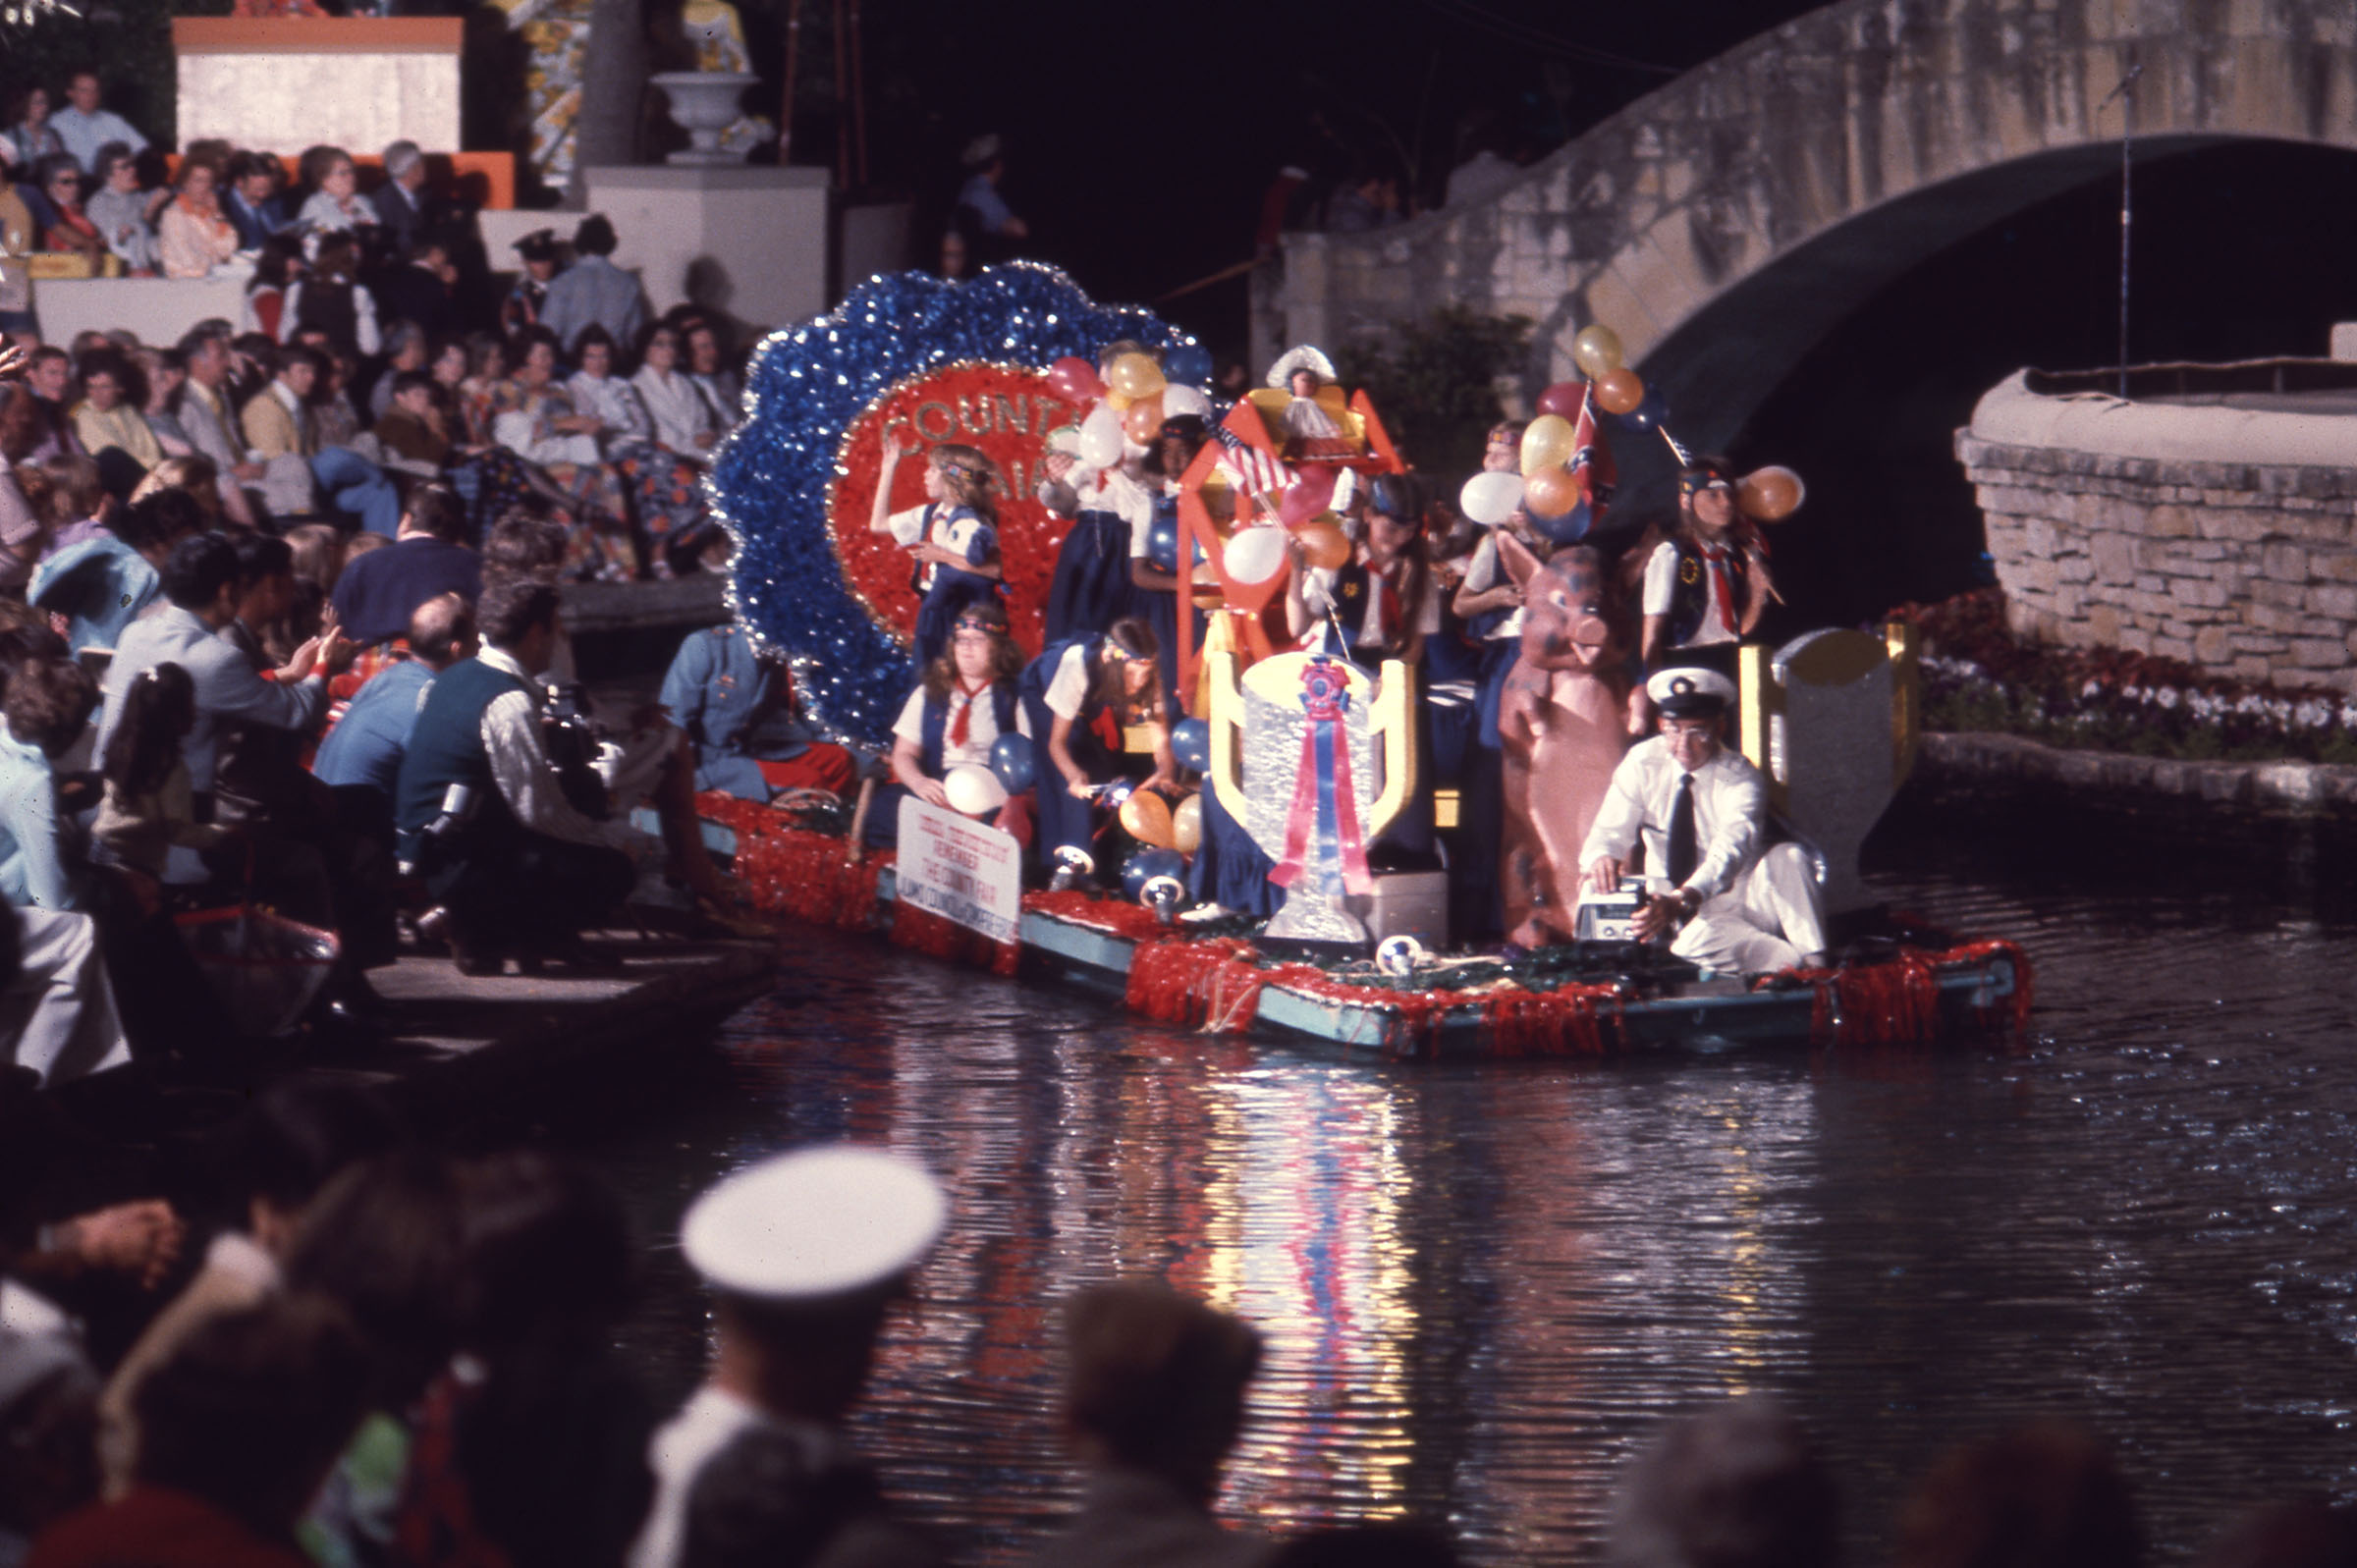 A float on water with people in large costumes in front of a crowd of onlookers